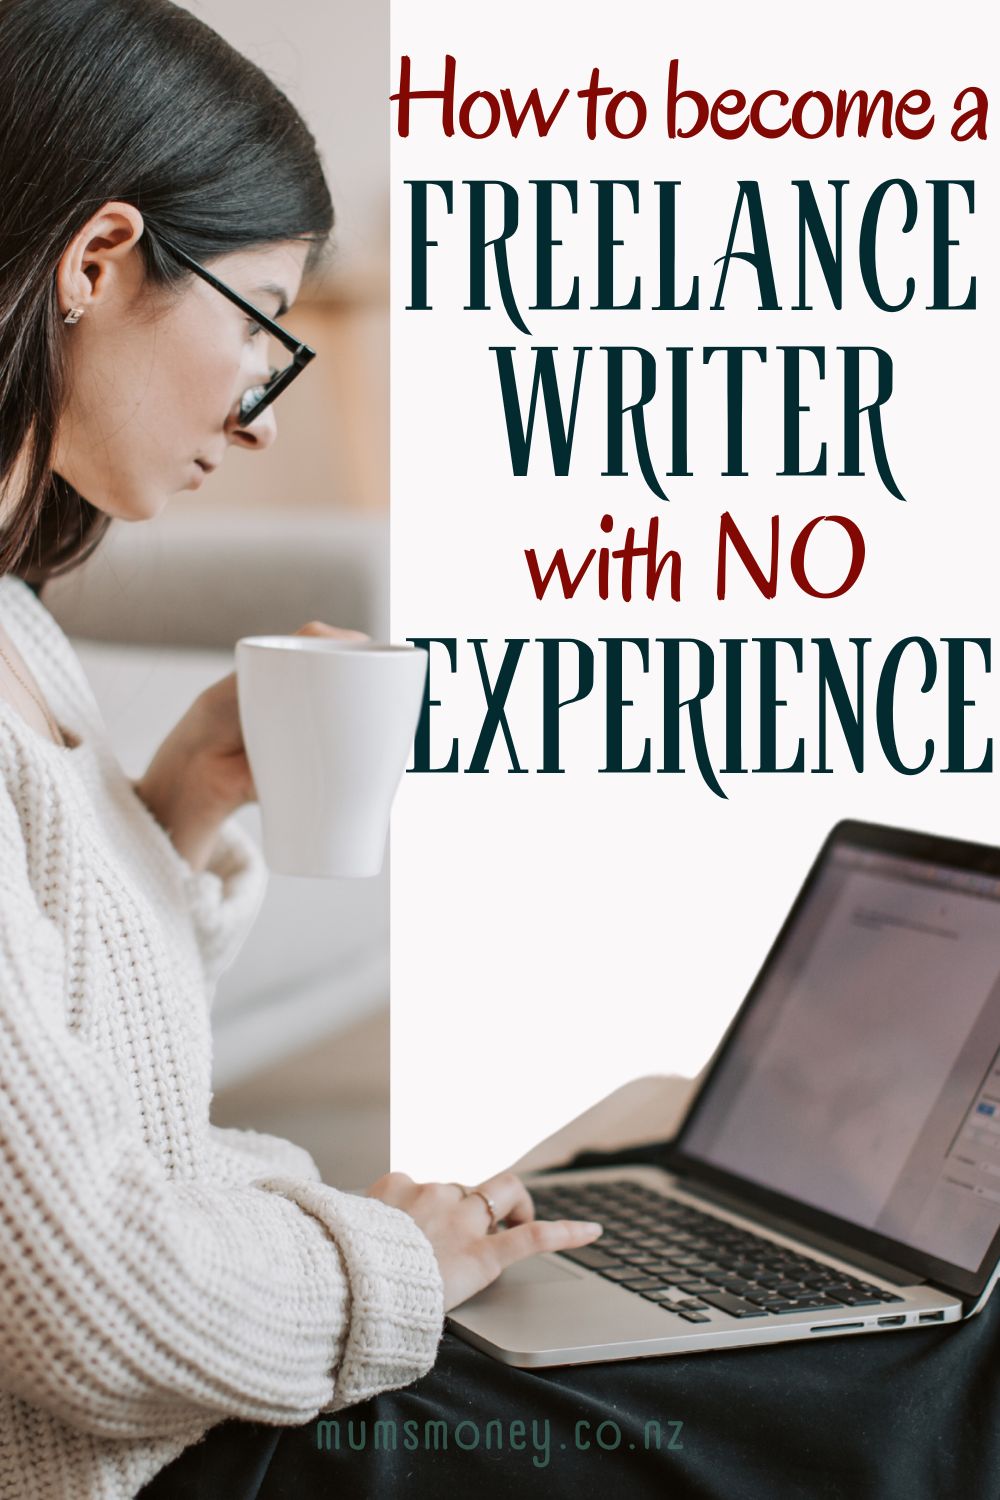 How To Become a Freelance Writer With No Experience Pin Image